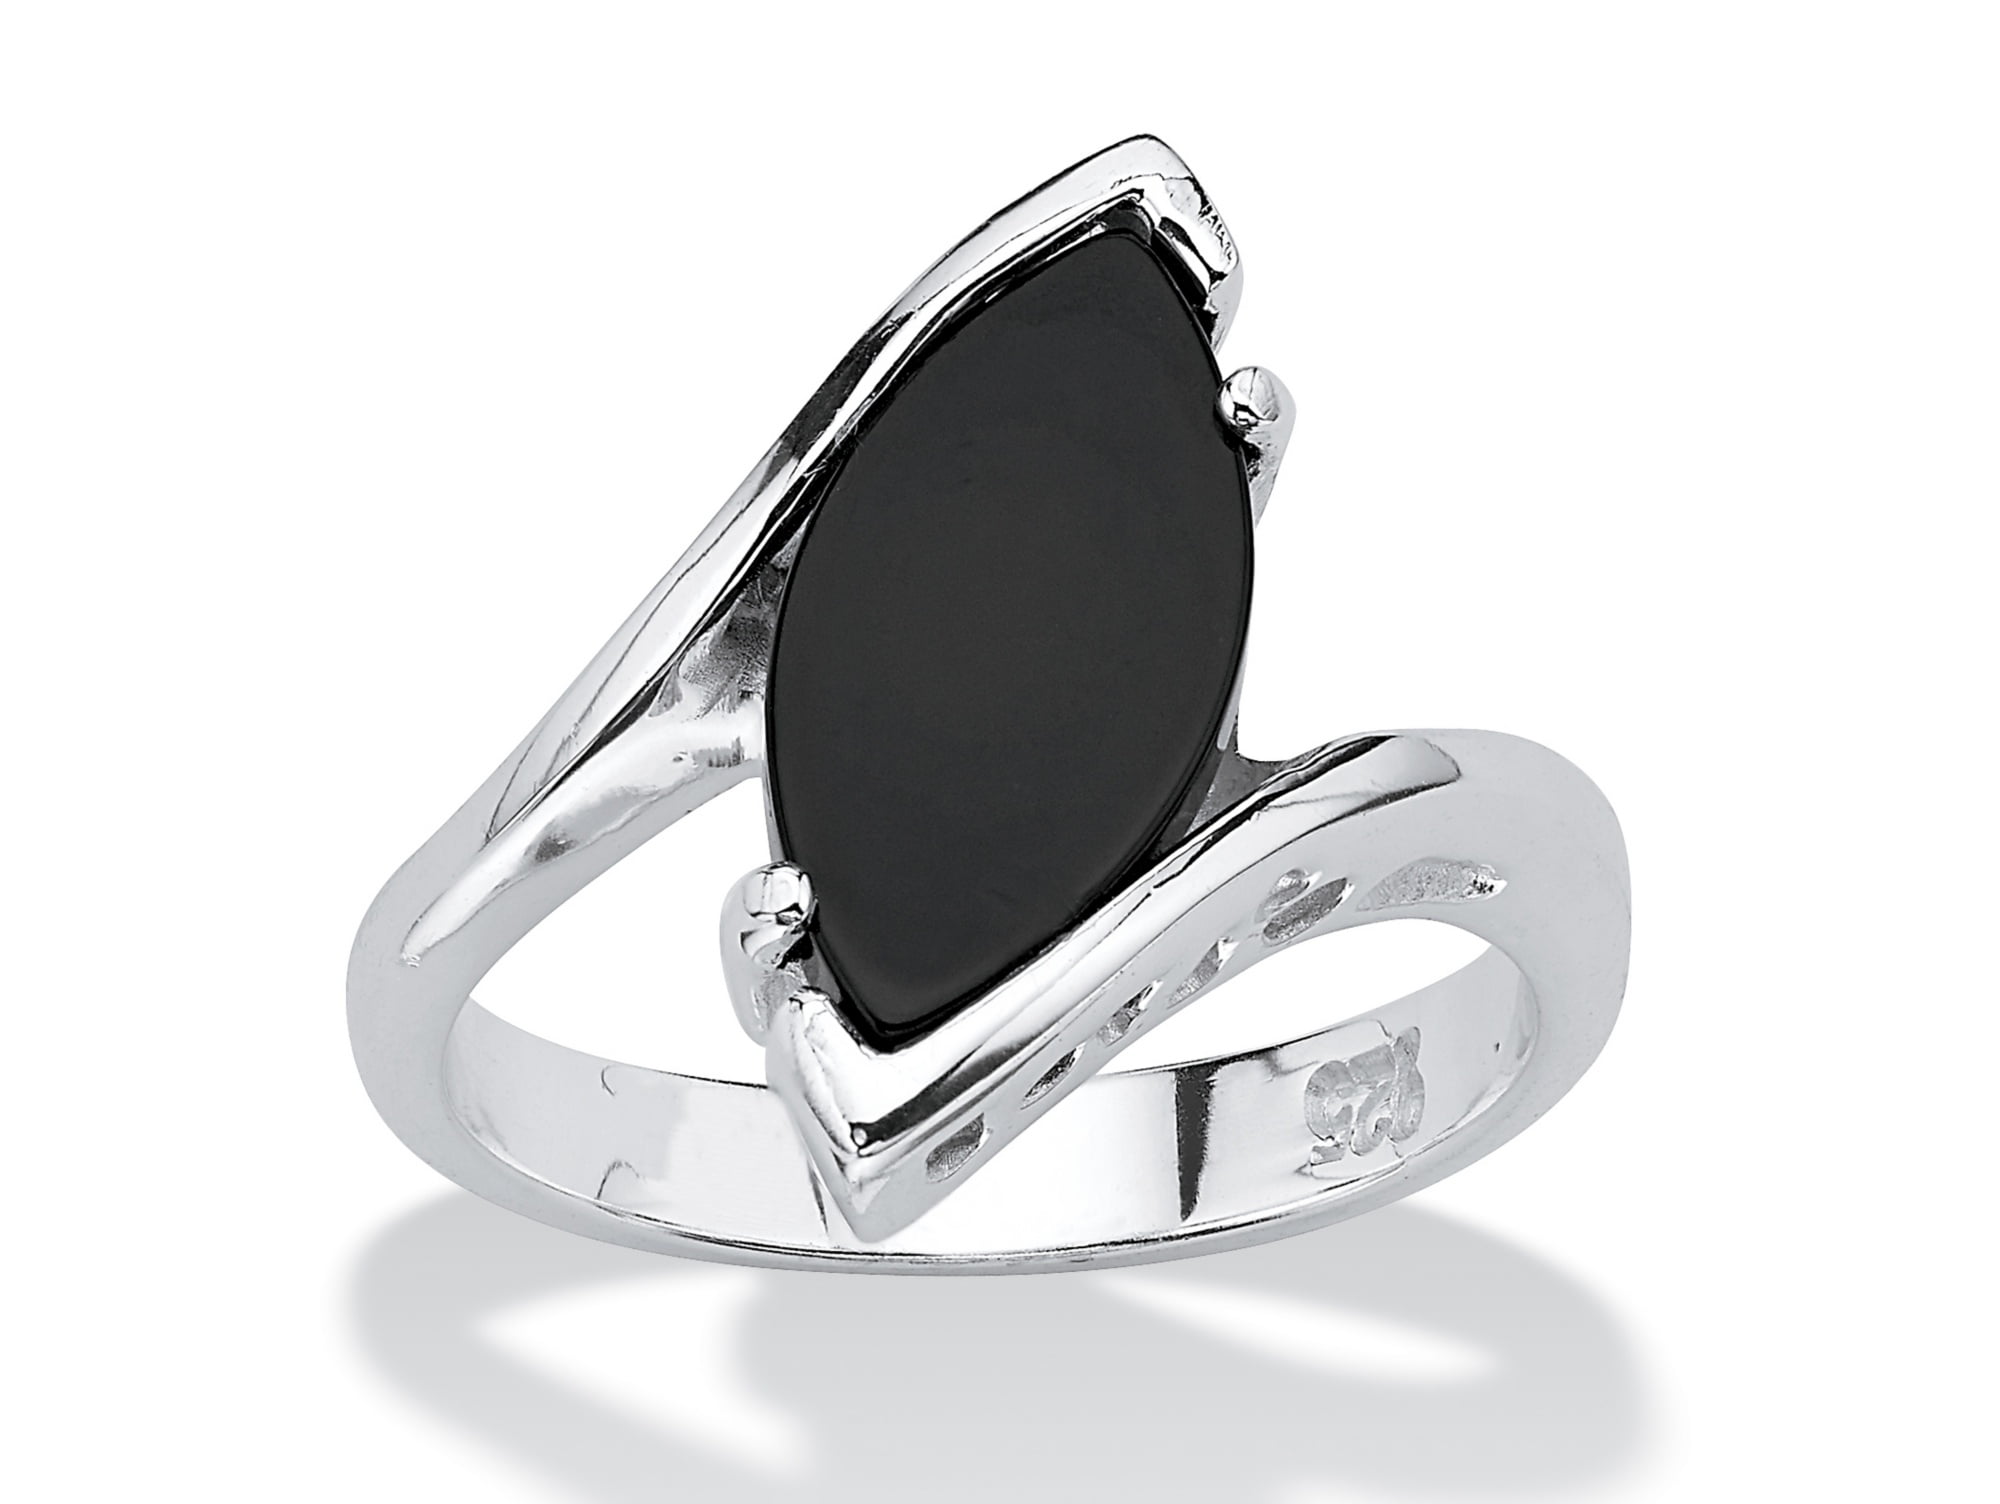 Details about   925 STERLING SILVER & BLACK SPINEL MARQUISE STATEMENT RING SIZE 11 